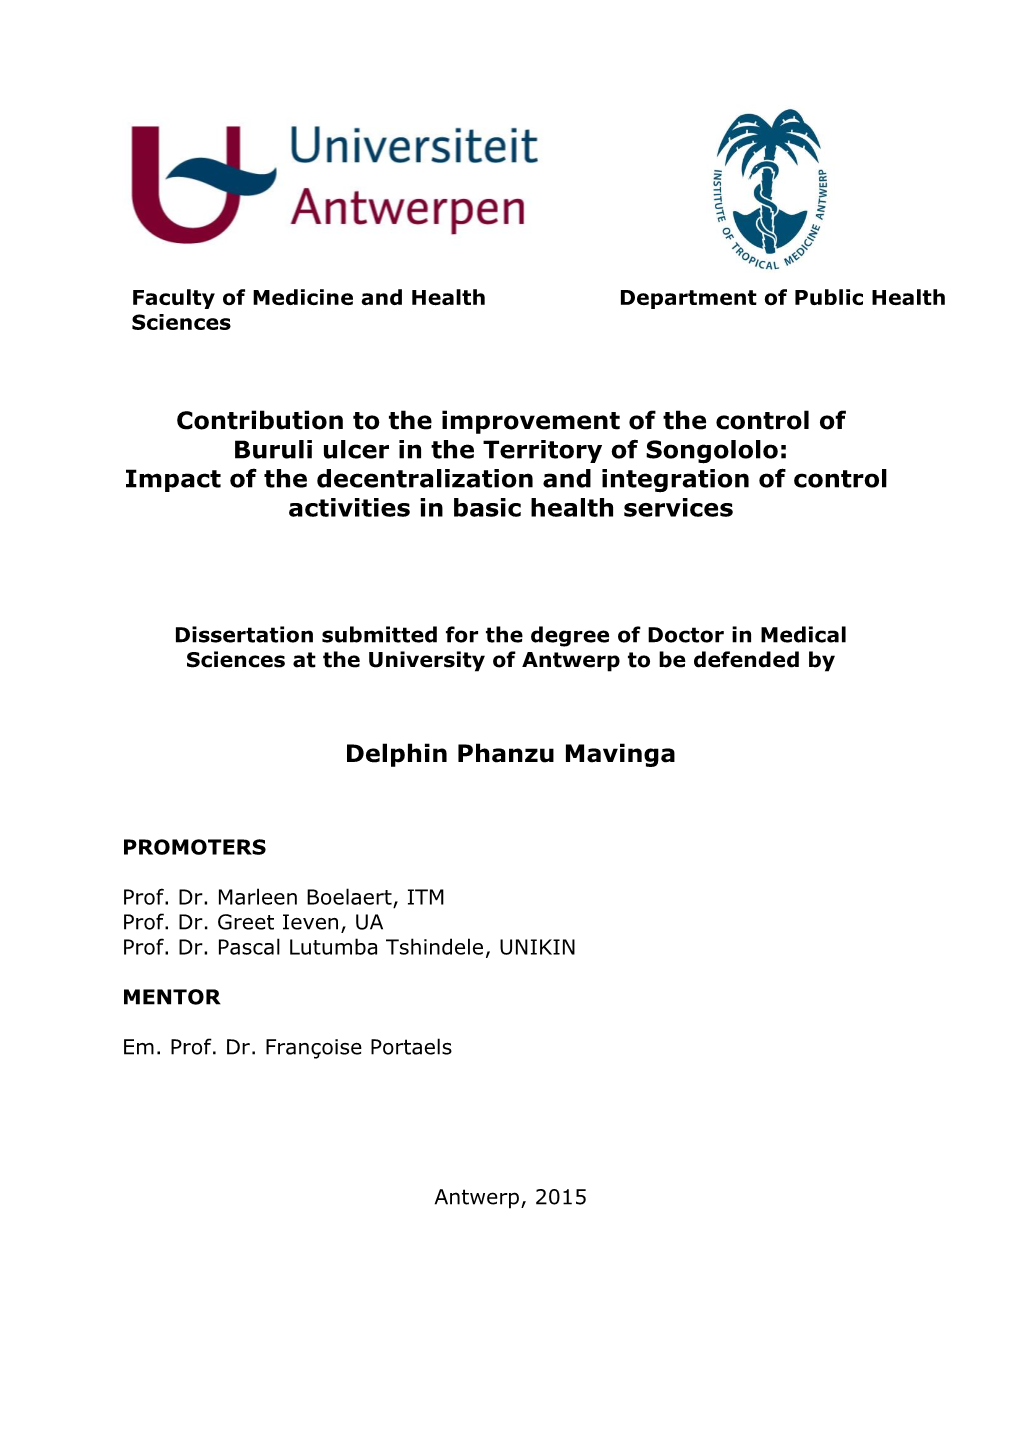 Impact of the Decentralization and Integration of Control Activities in Basic Health Services